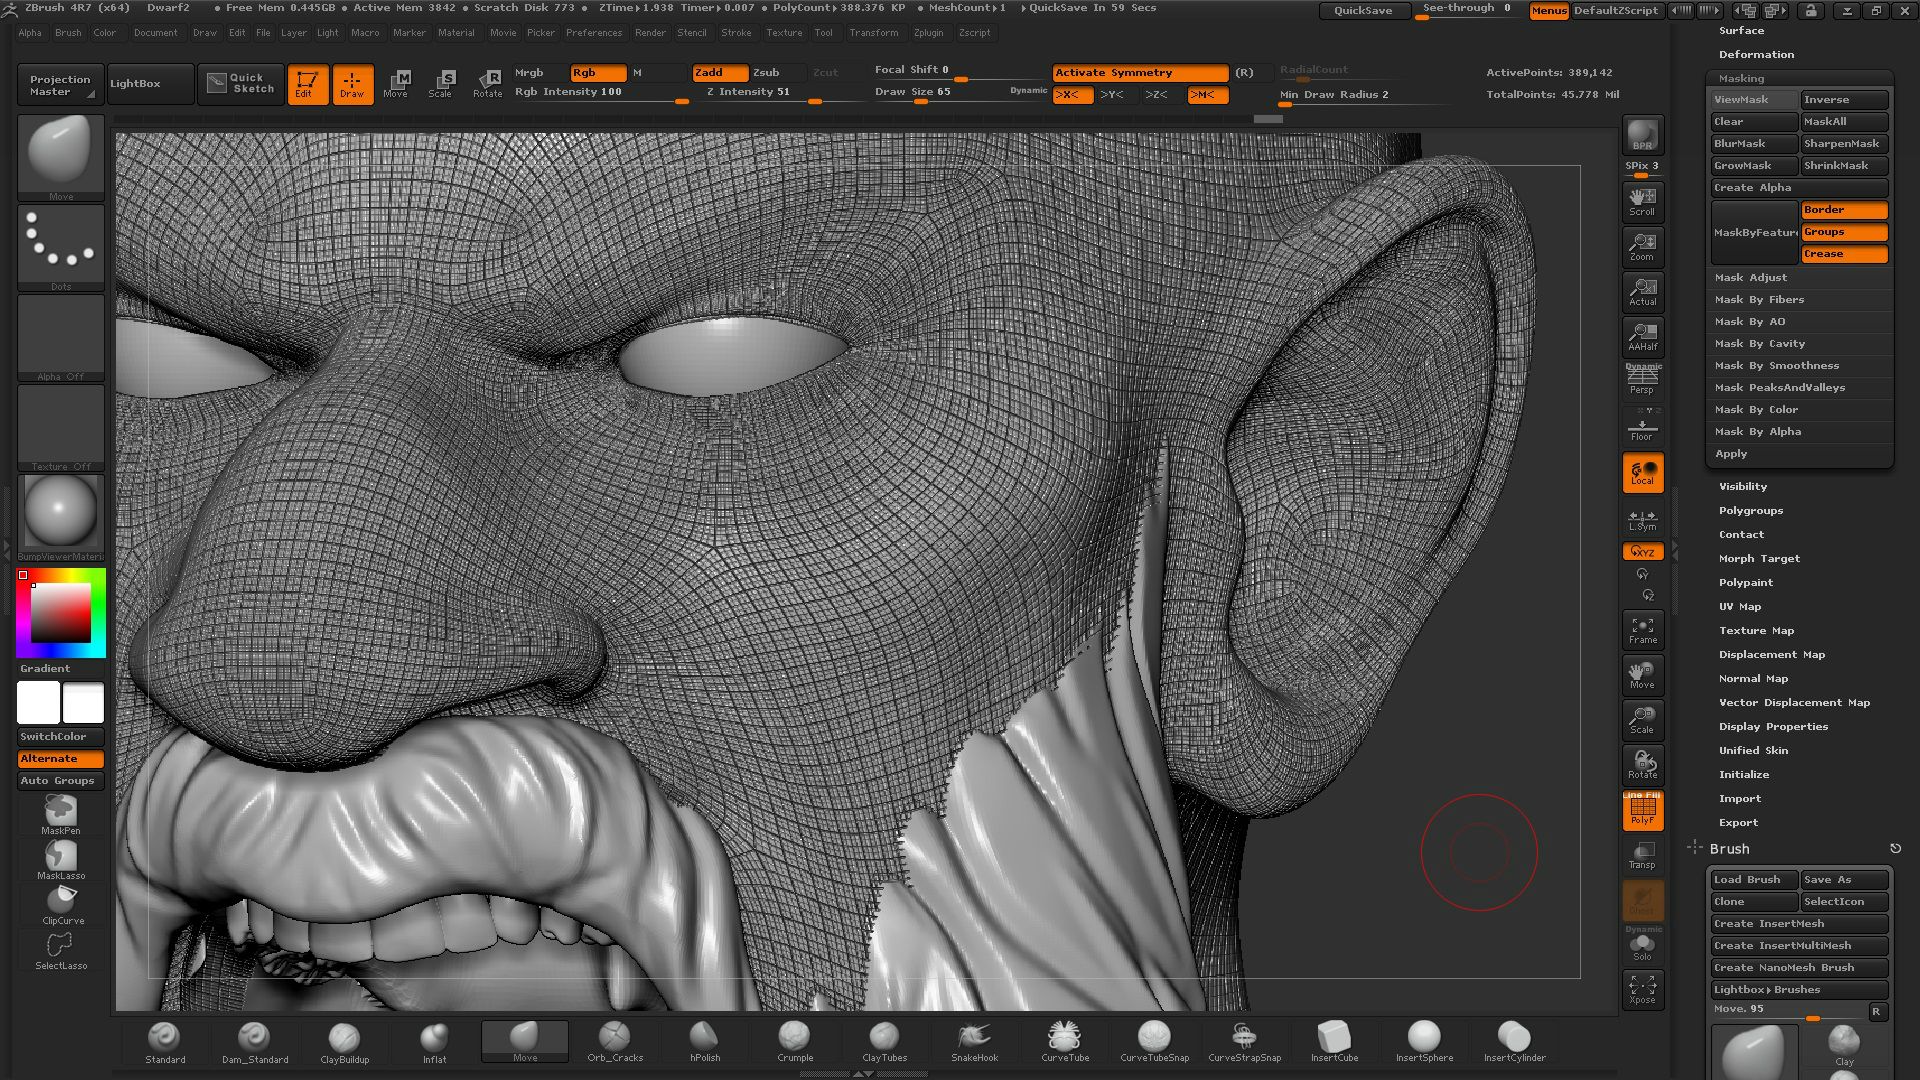 reset lost polyframe zbrush